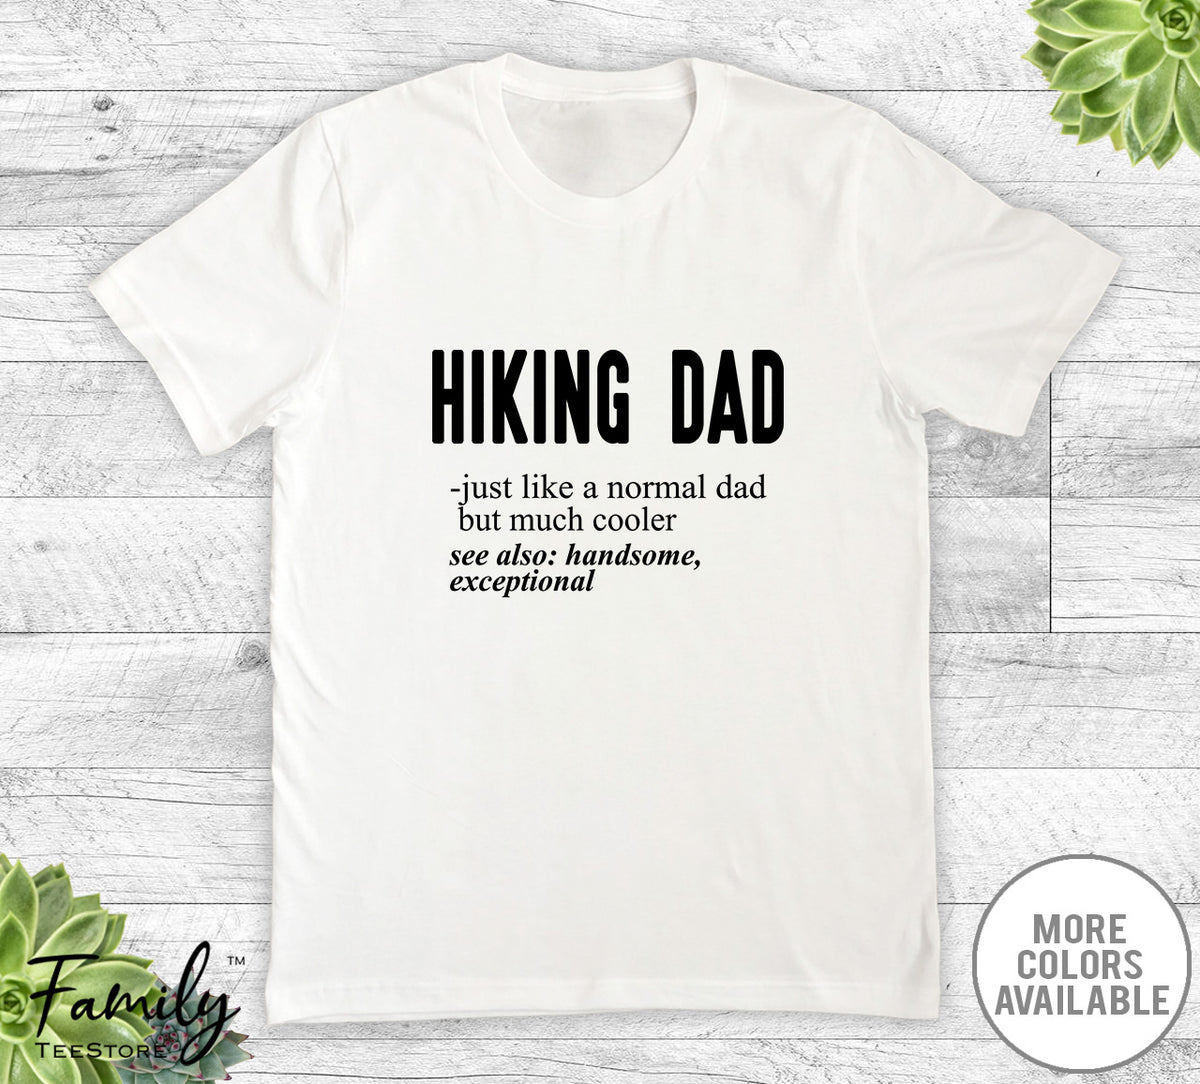 Hiking Dad Just Like A Normal Dad - Unisex T-shirt - Hiking Shirt - Hiking Dad Gift - familyteeprints